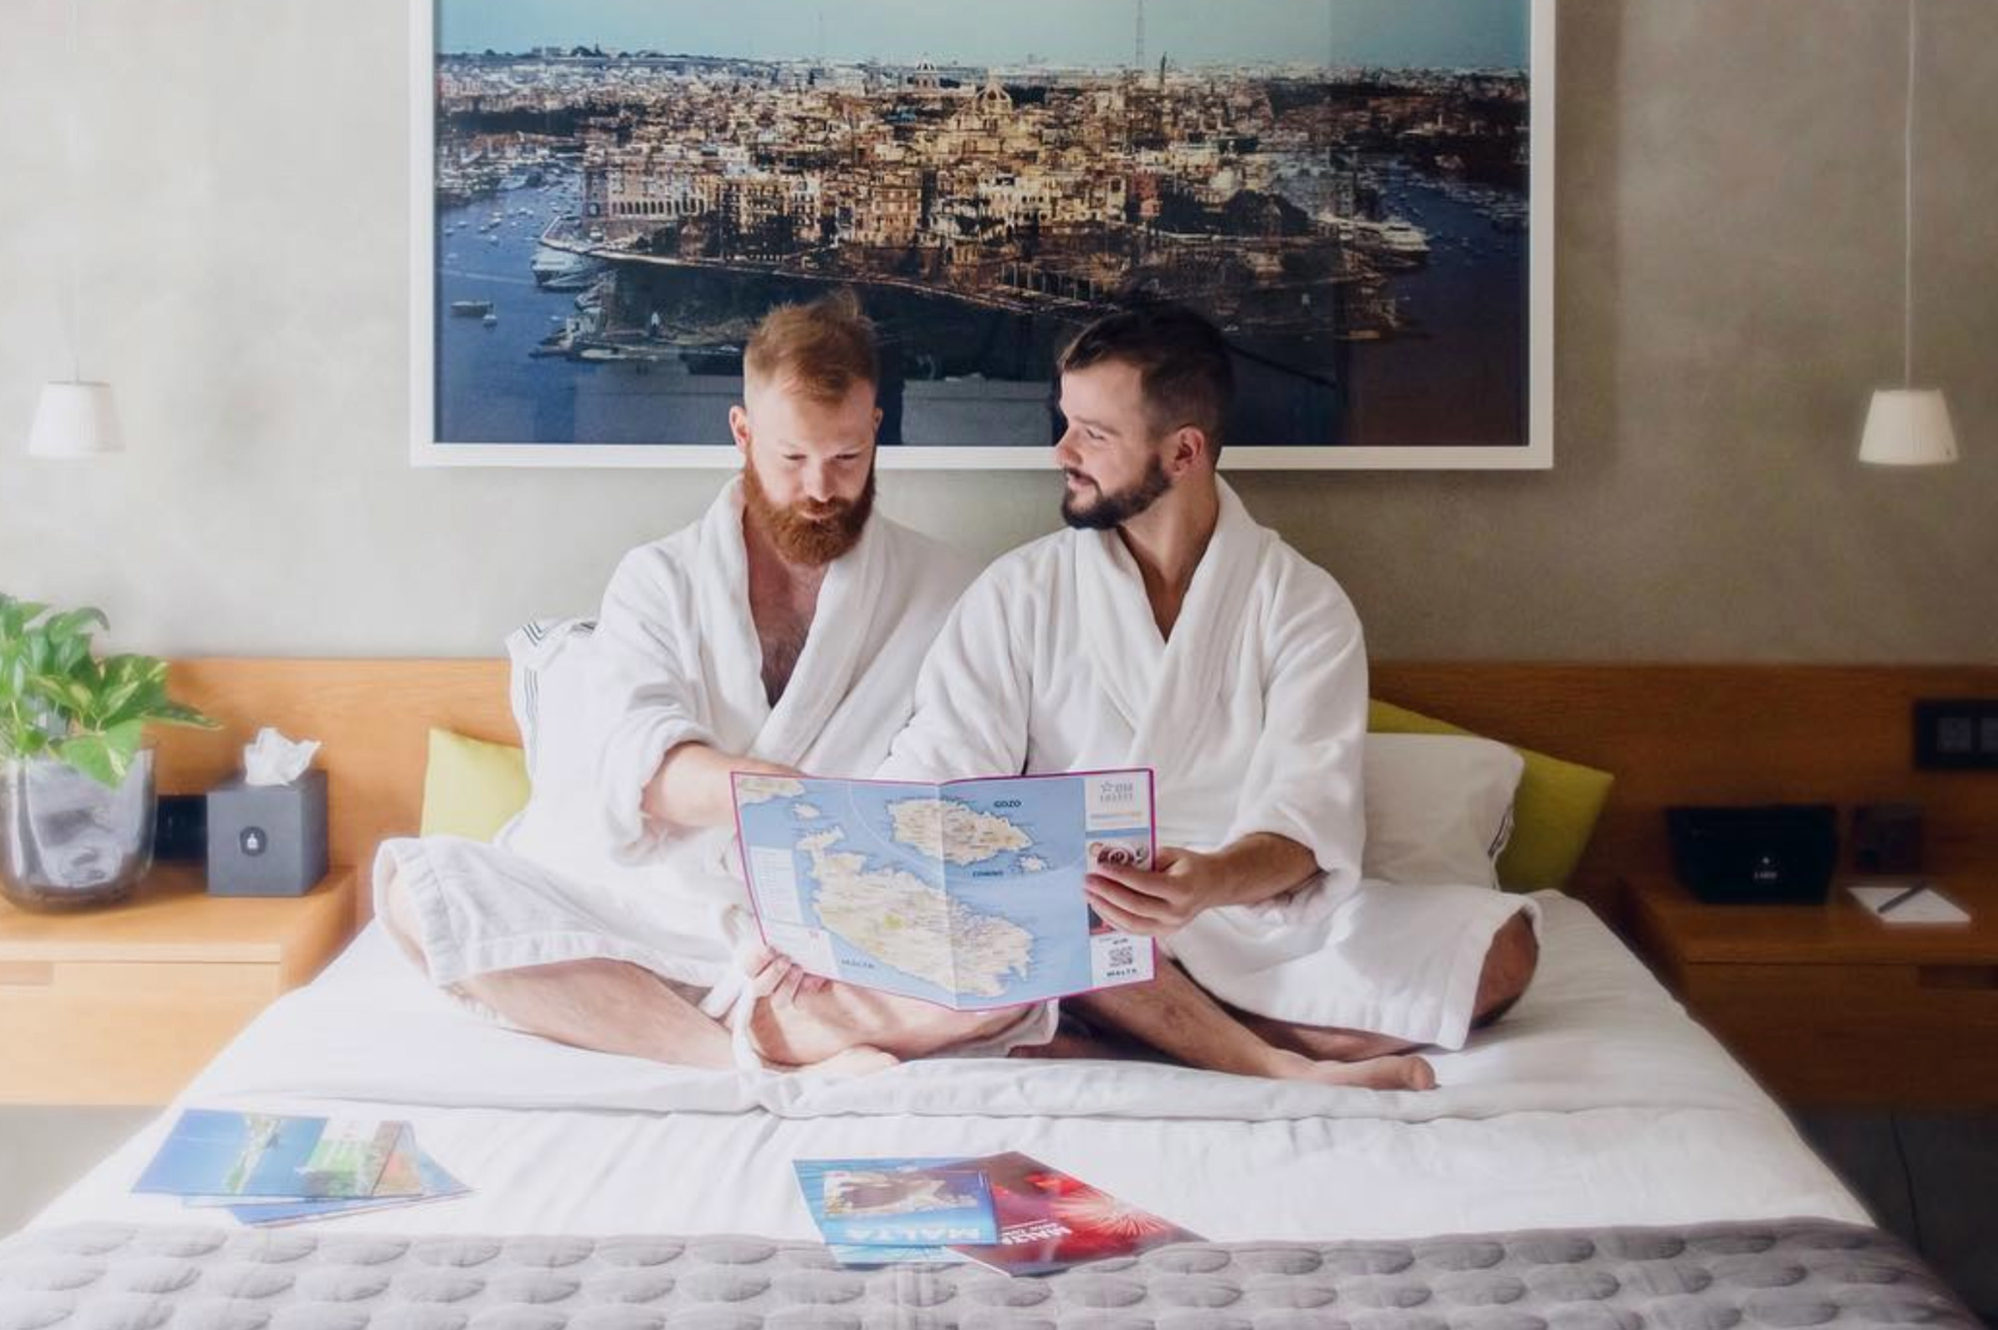 Stern.de Interview: Our “Gay Friendly Travel Tips”